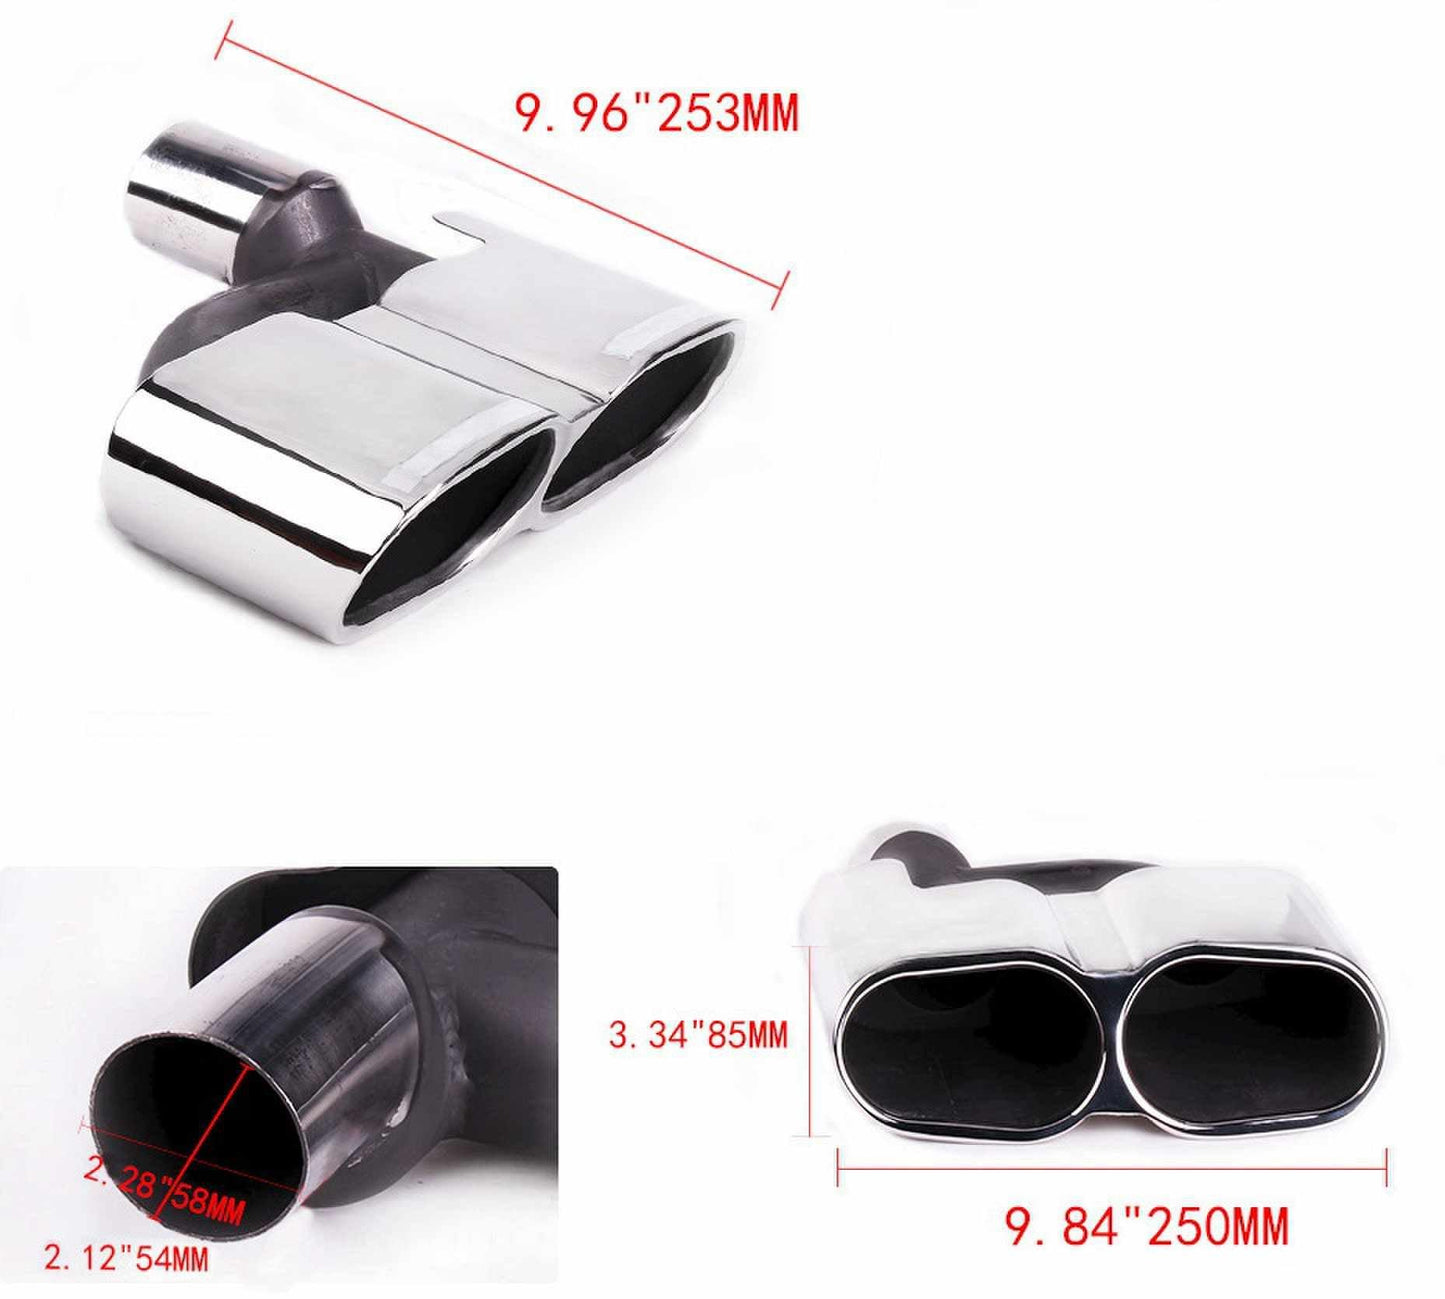 RASTP 1 Pair Modified Vehicle Exhaust Tail Muffler Tip Stainless Steel Pipe for Benz 08-13 S Class W22 - RASTP